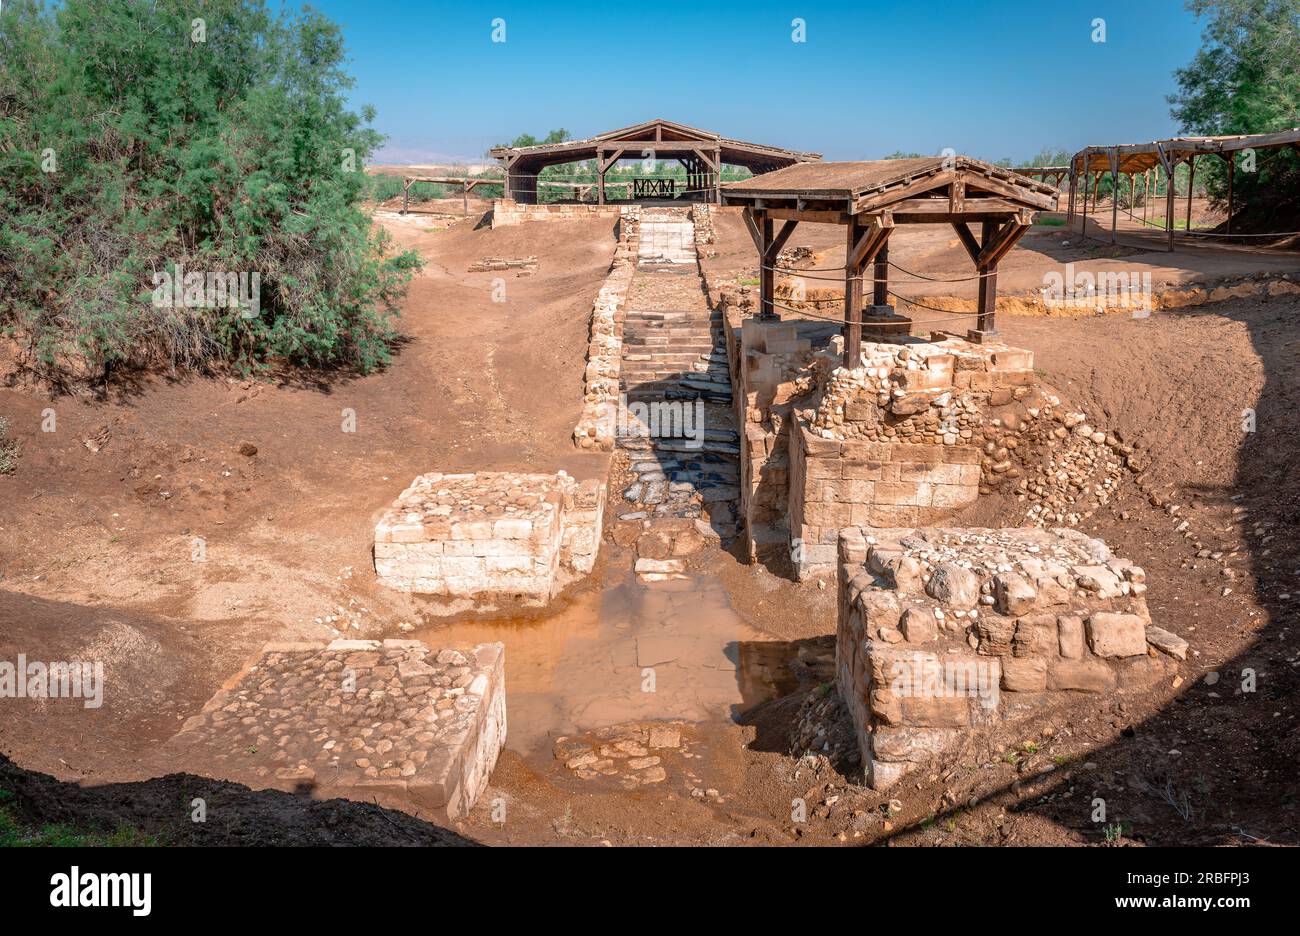 The Baptismal Site of Jesus Christ, considered to be the location of the Baptism of Jesus by John the Baptist, on the east bank of the river Jordan. Stock Photo